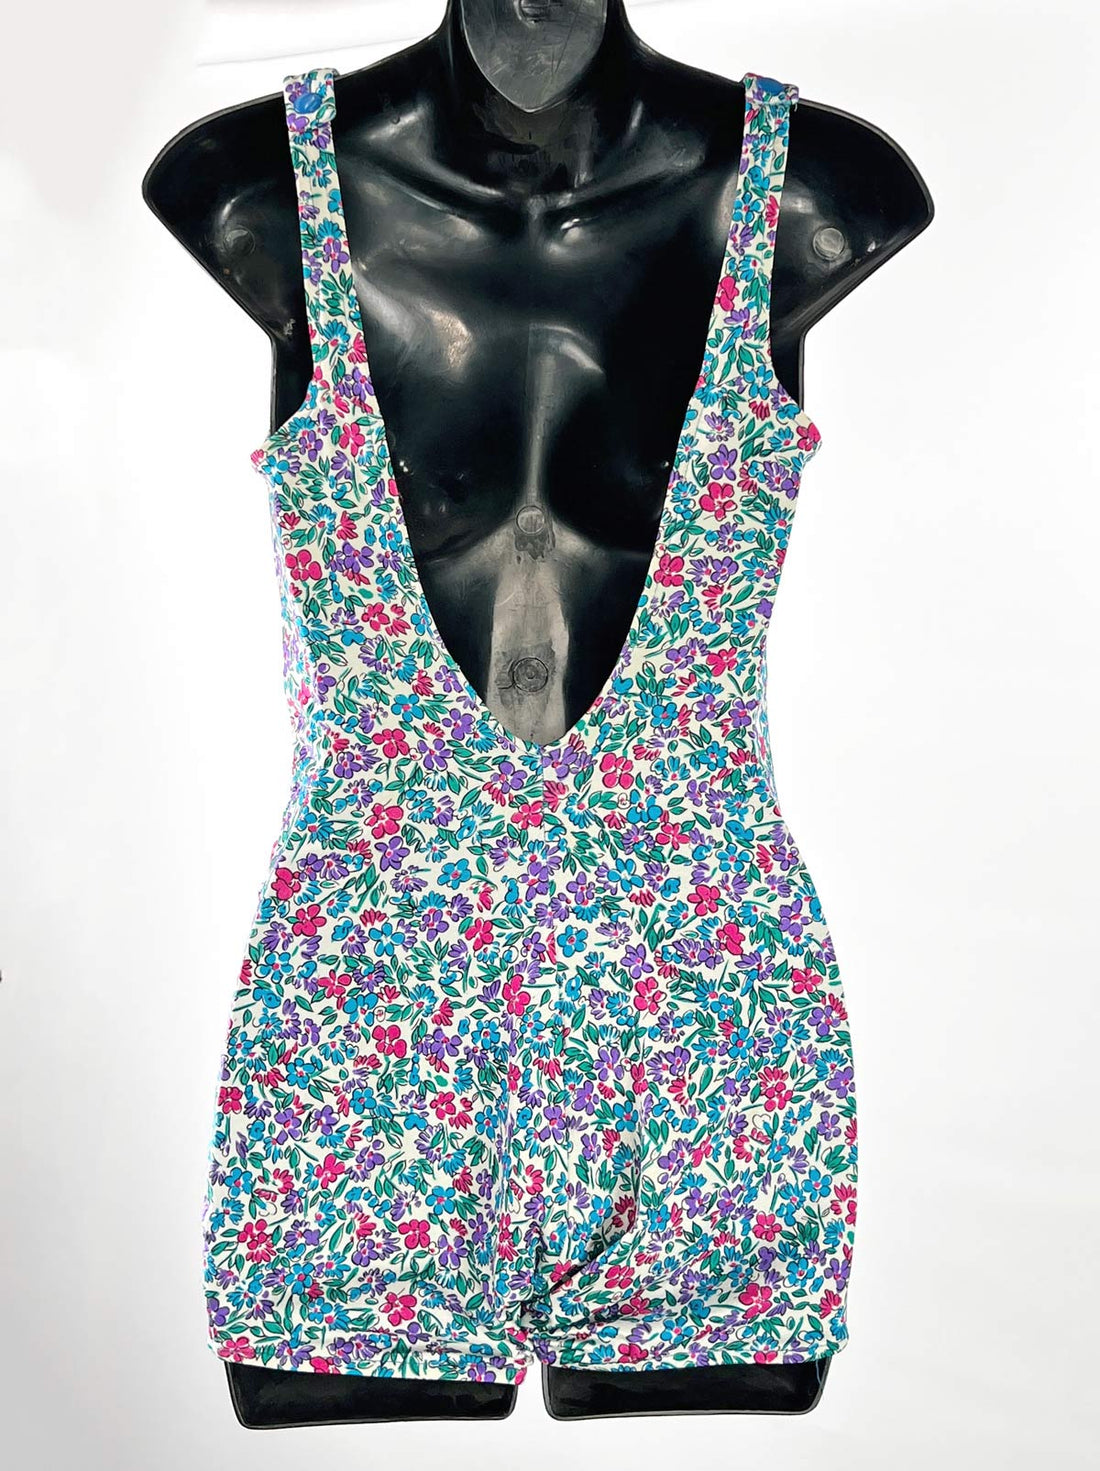 60s 70s One Piece Pin Up Swimsuit Women's Vintage Floral XL Perfection Fit by Roxanne VFG